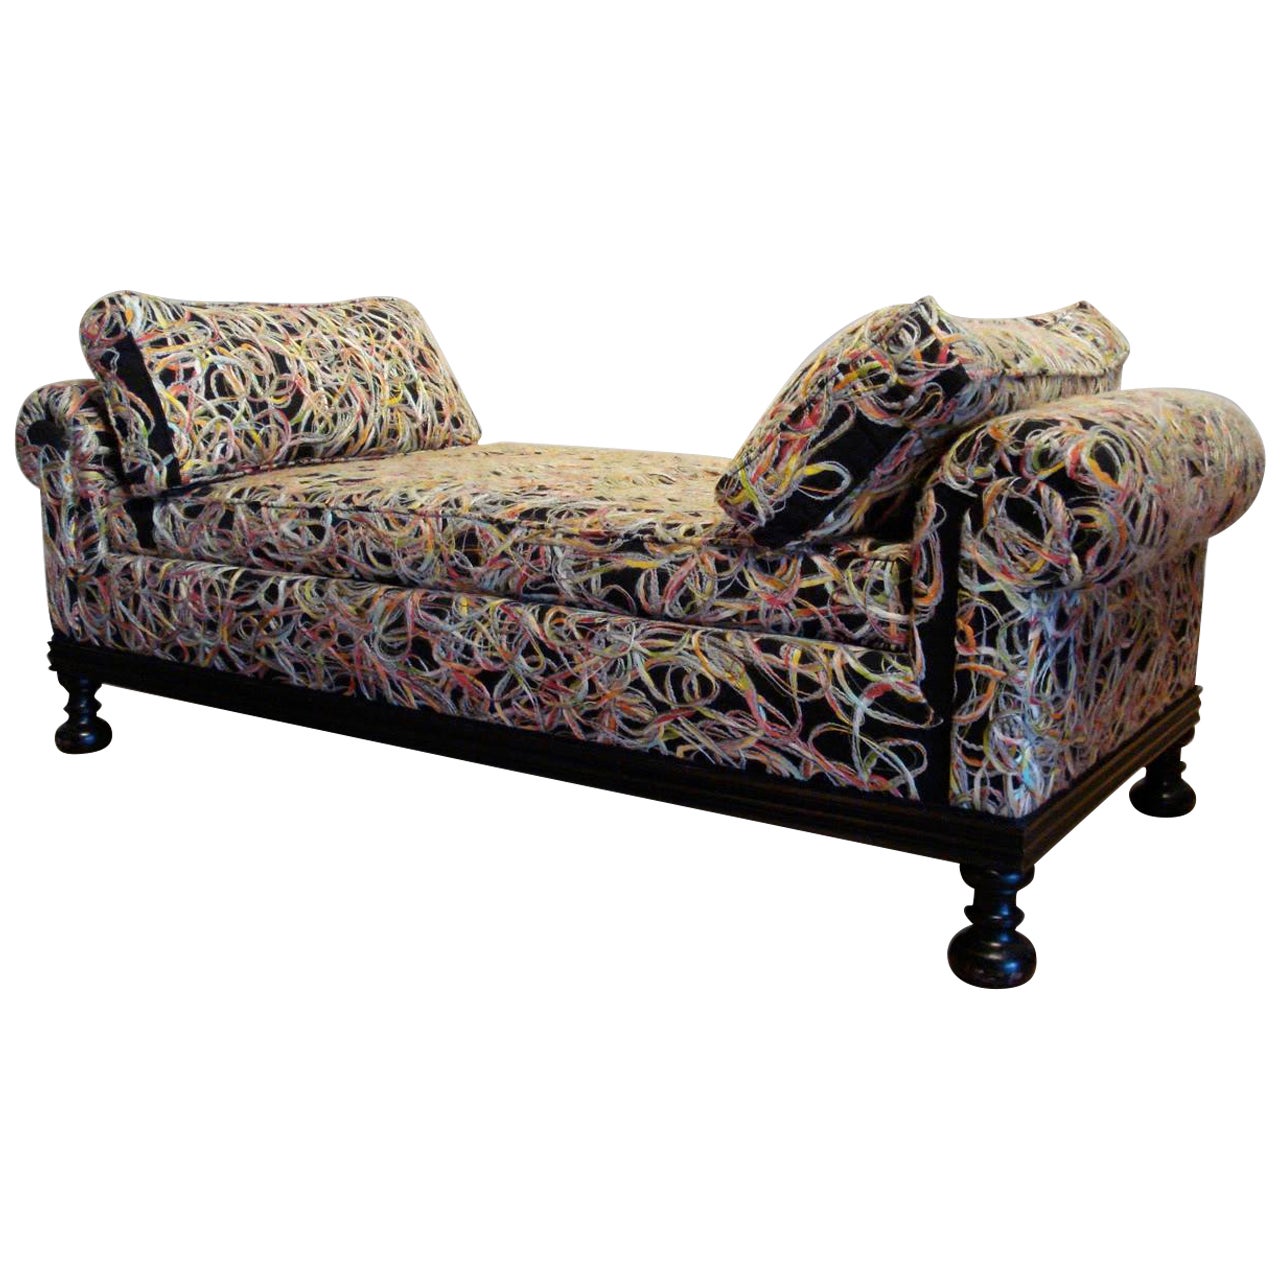 Very unusual 19th Century French Reupholstered Daybed Sofa